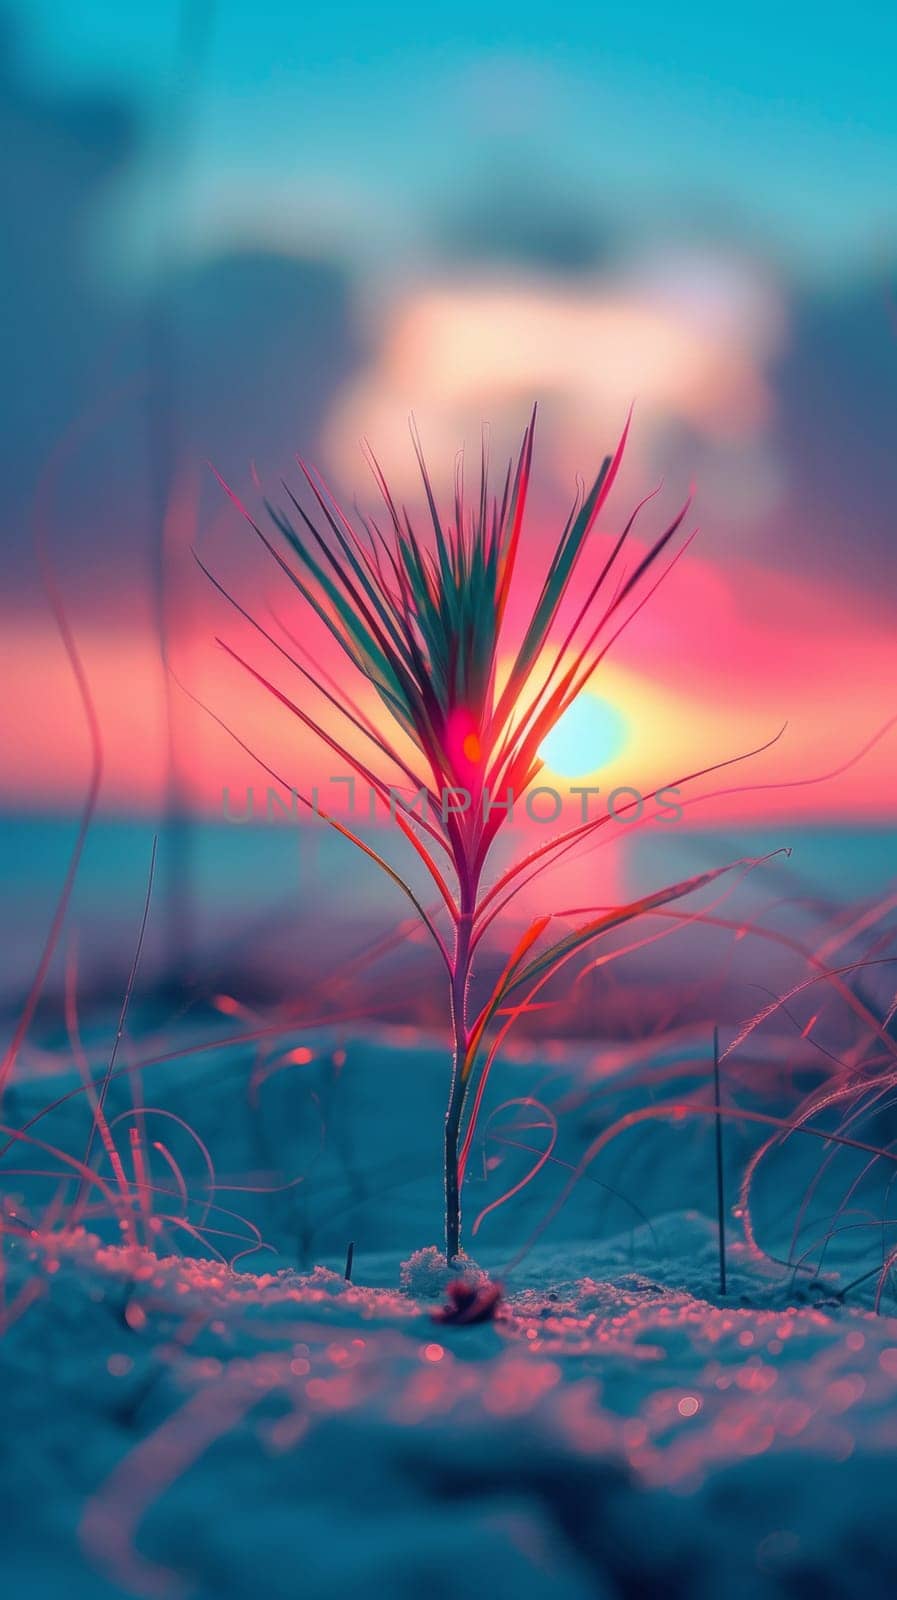 A small plant in the sand with a sunset behind it